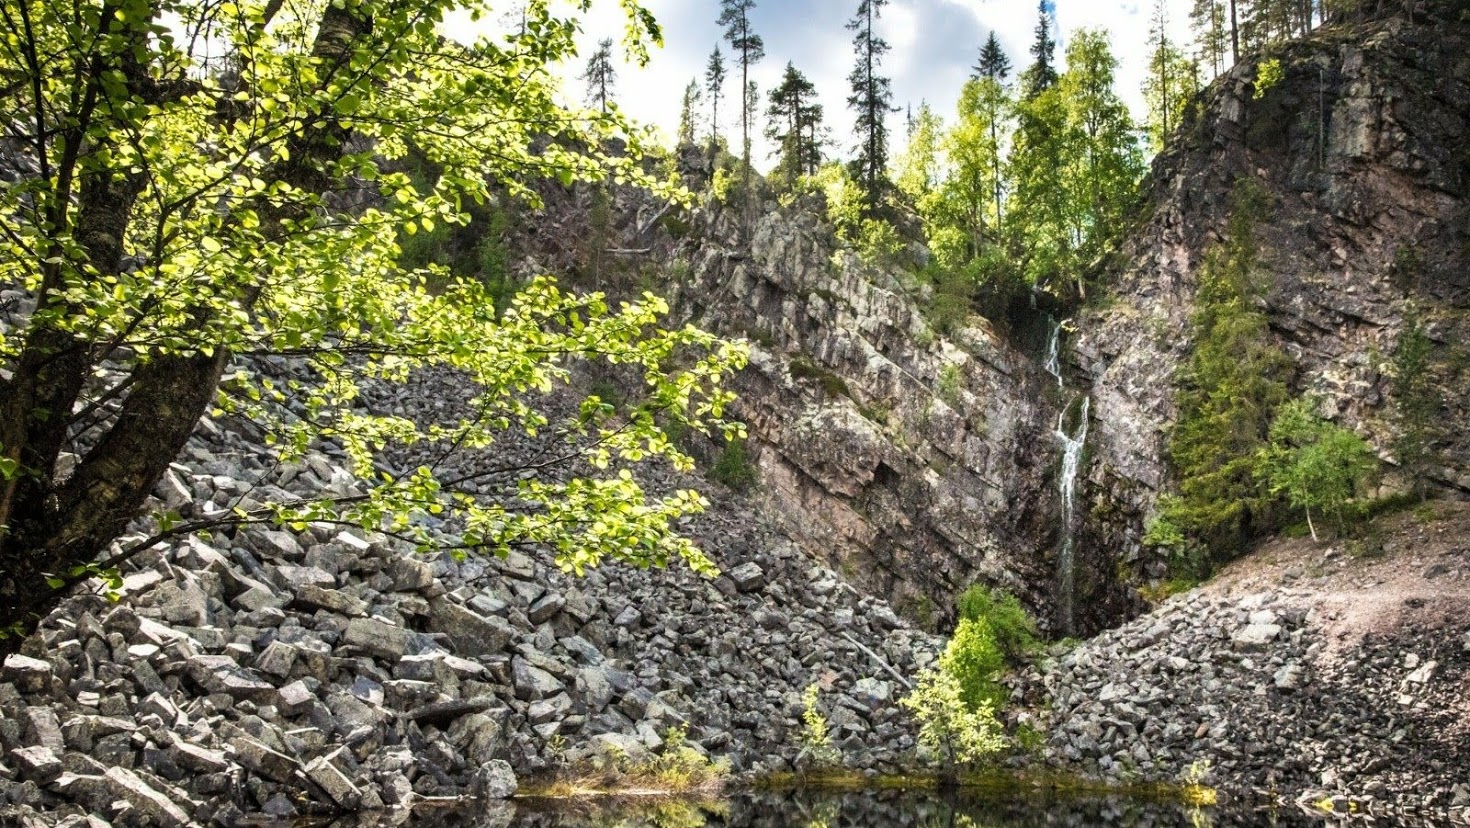 Kingdom of two giant fells: Pyhä-Luosto national park